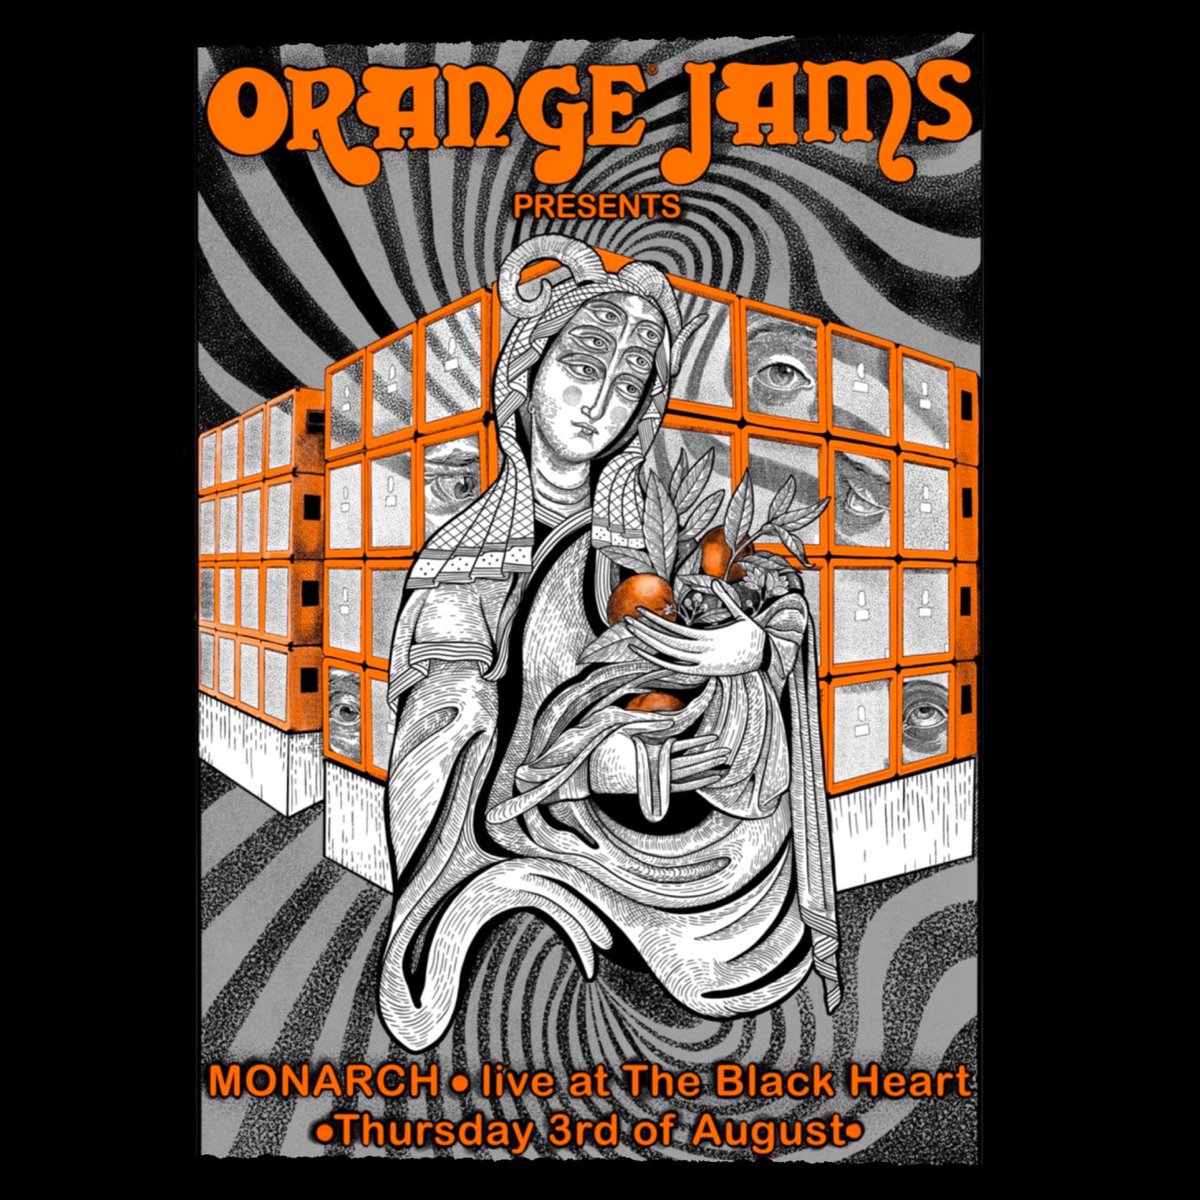 San Diego psych-rock masters MONARCH hit London on 3rd August for the first ever @OrangeAmps in-person Orange Jams session, live in The Black Heart of Camden Town ! Don’t miss your chance to be there.. secure your ticket now !